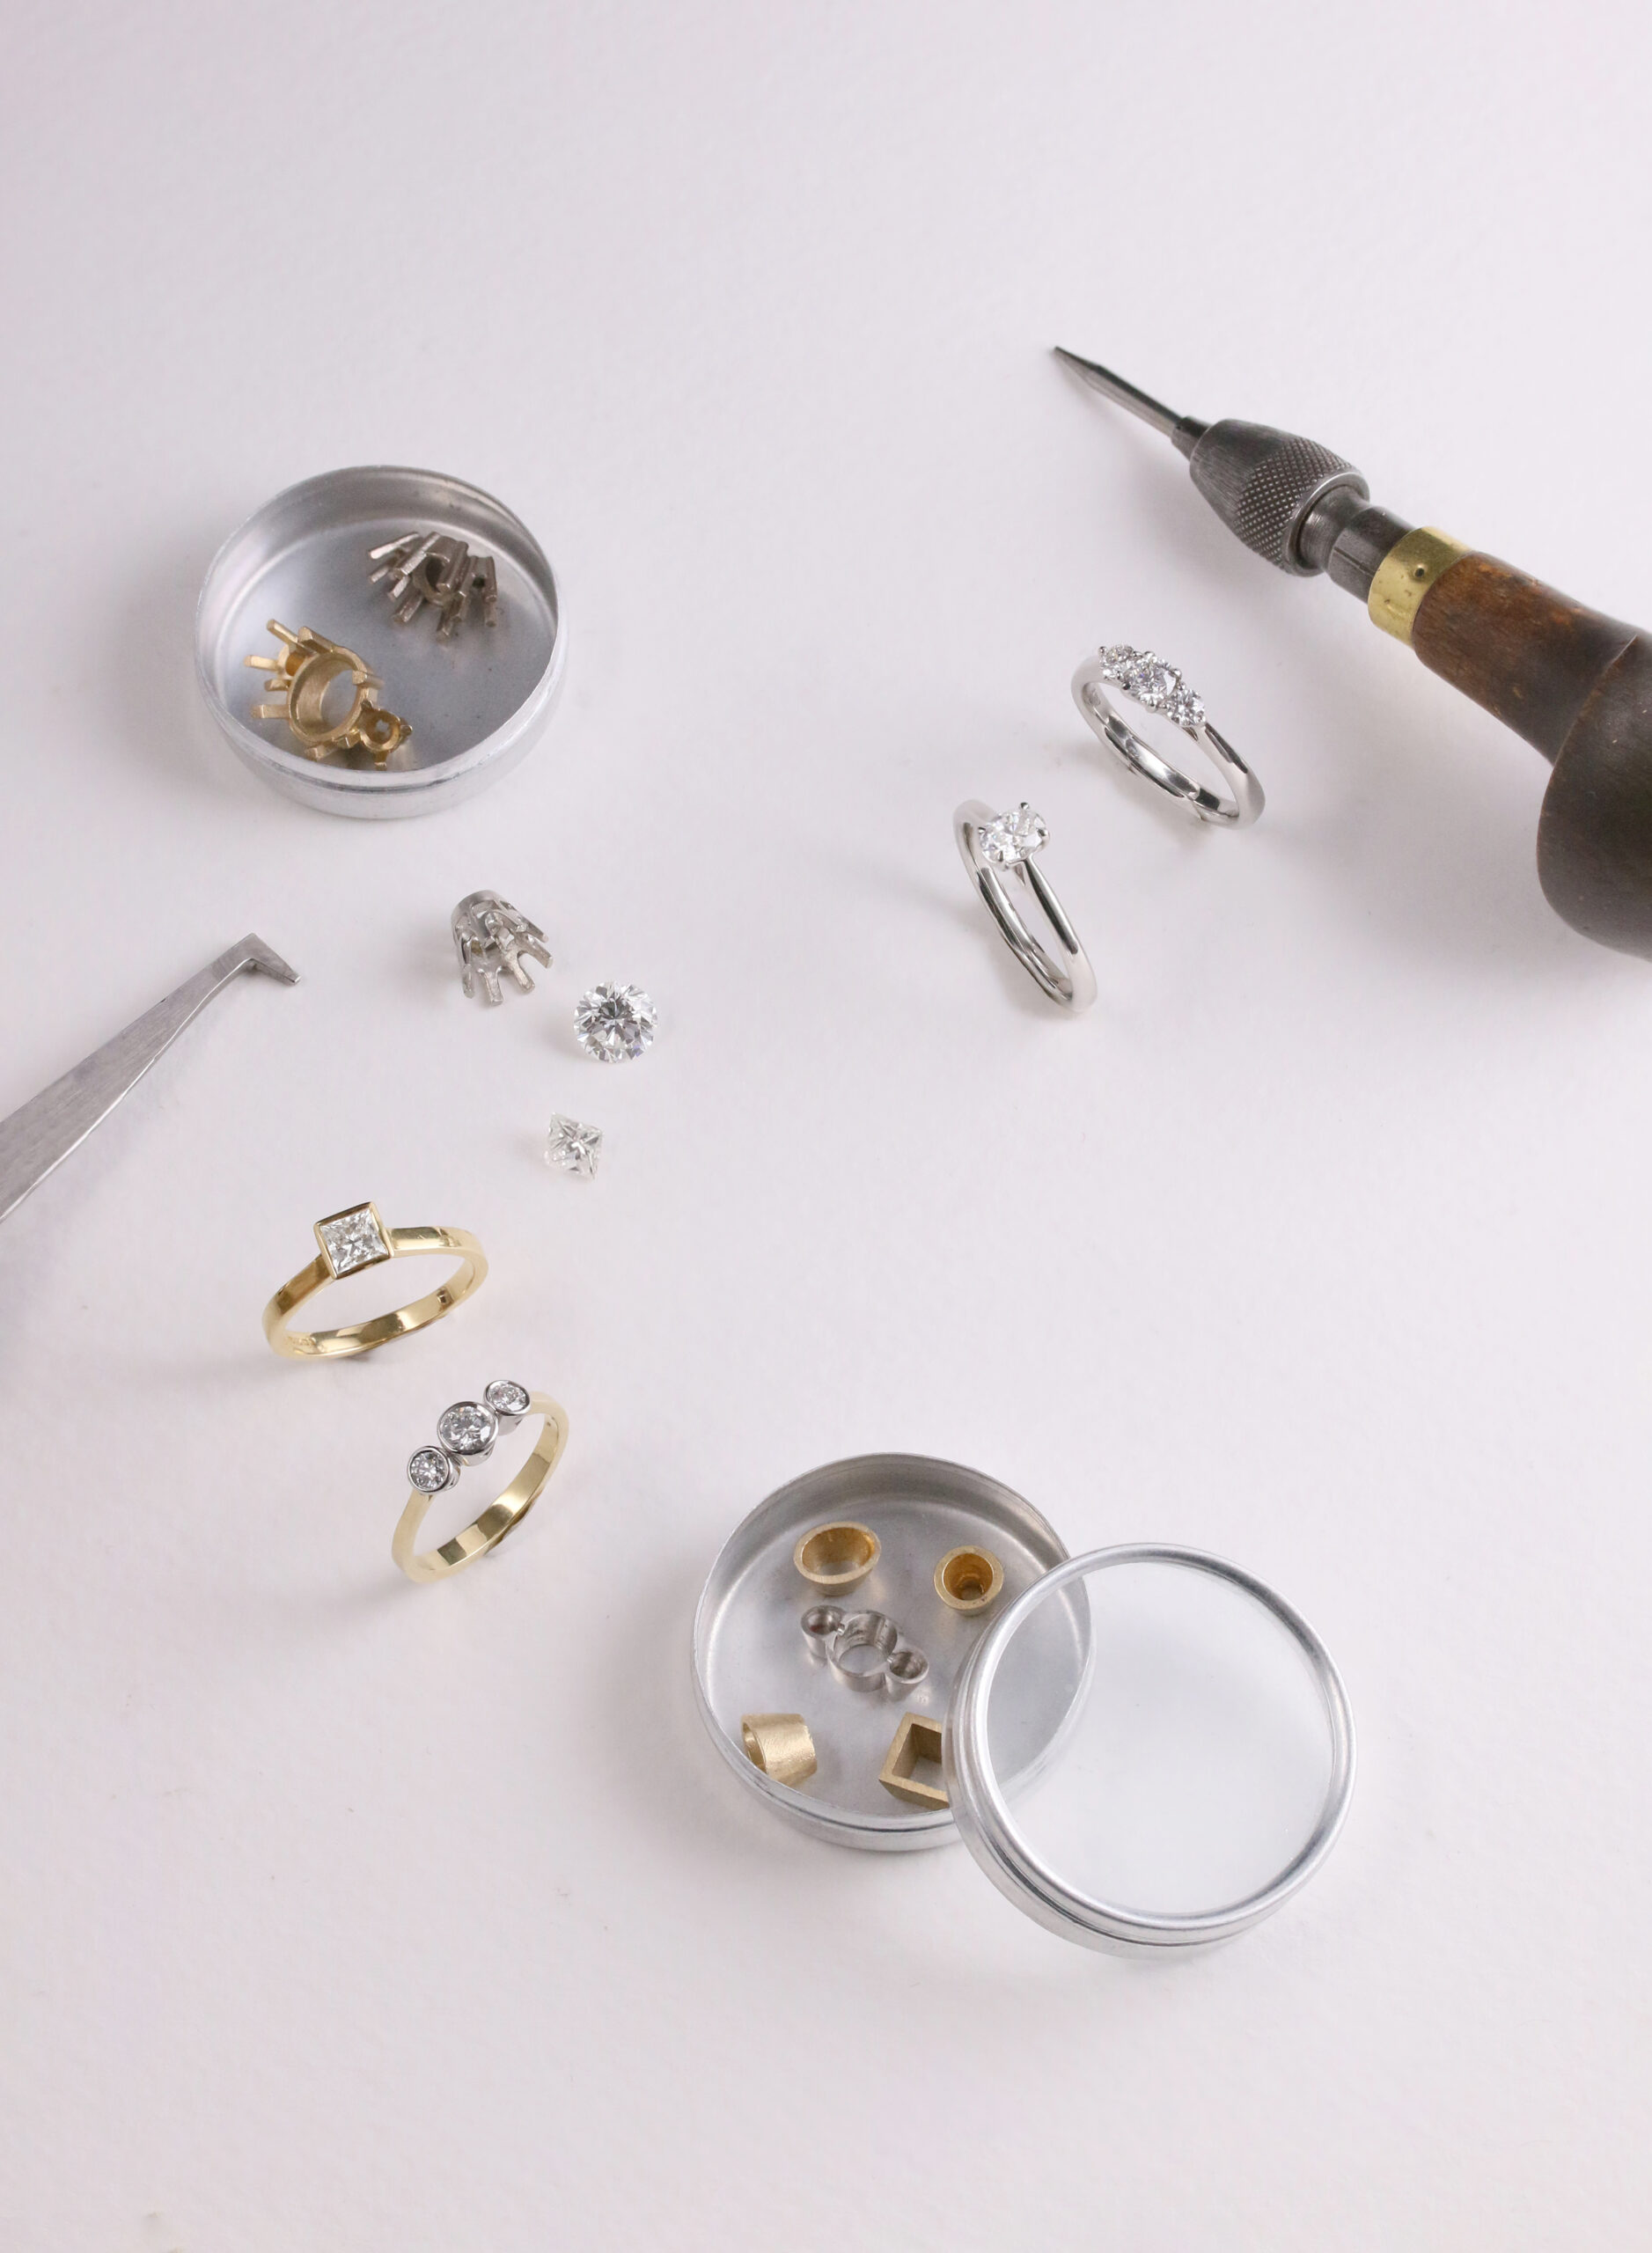 Diamond Engagement Rings surrounded by jewellery tools